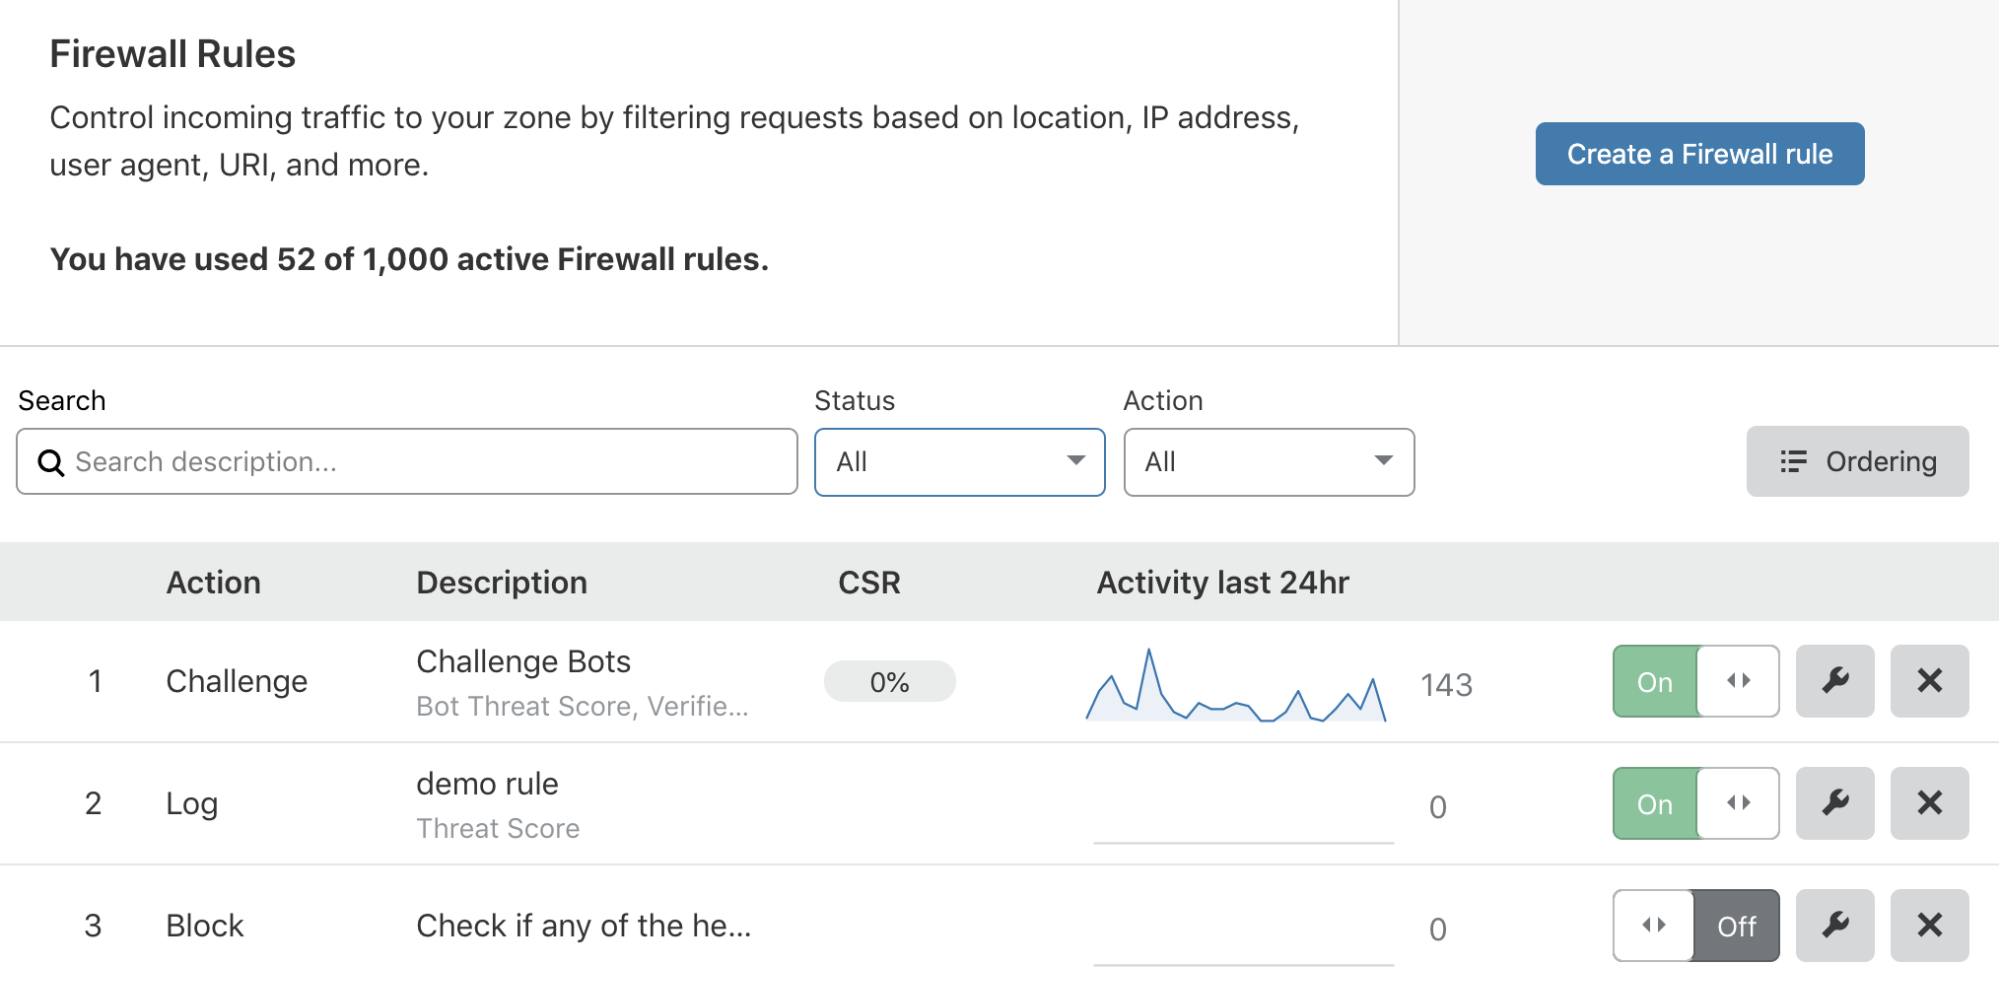 Firewall Analytics: Now available to all paid plans